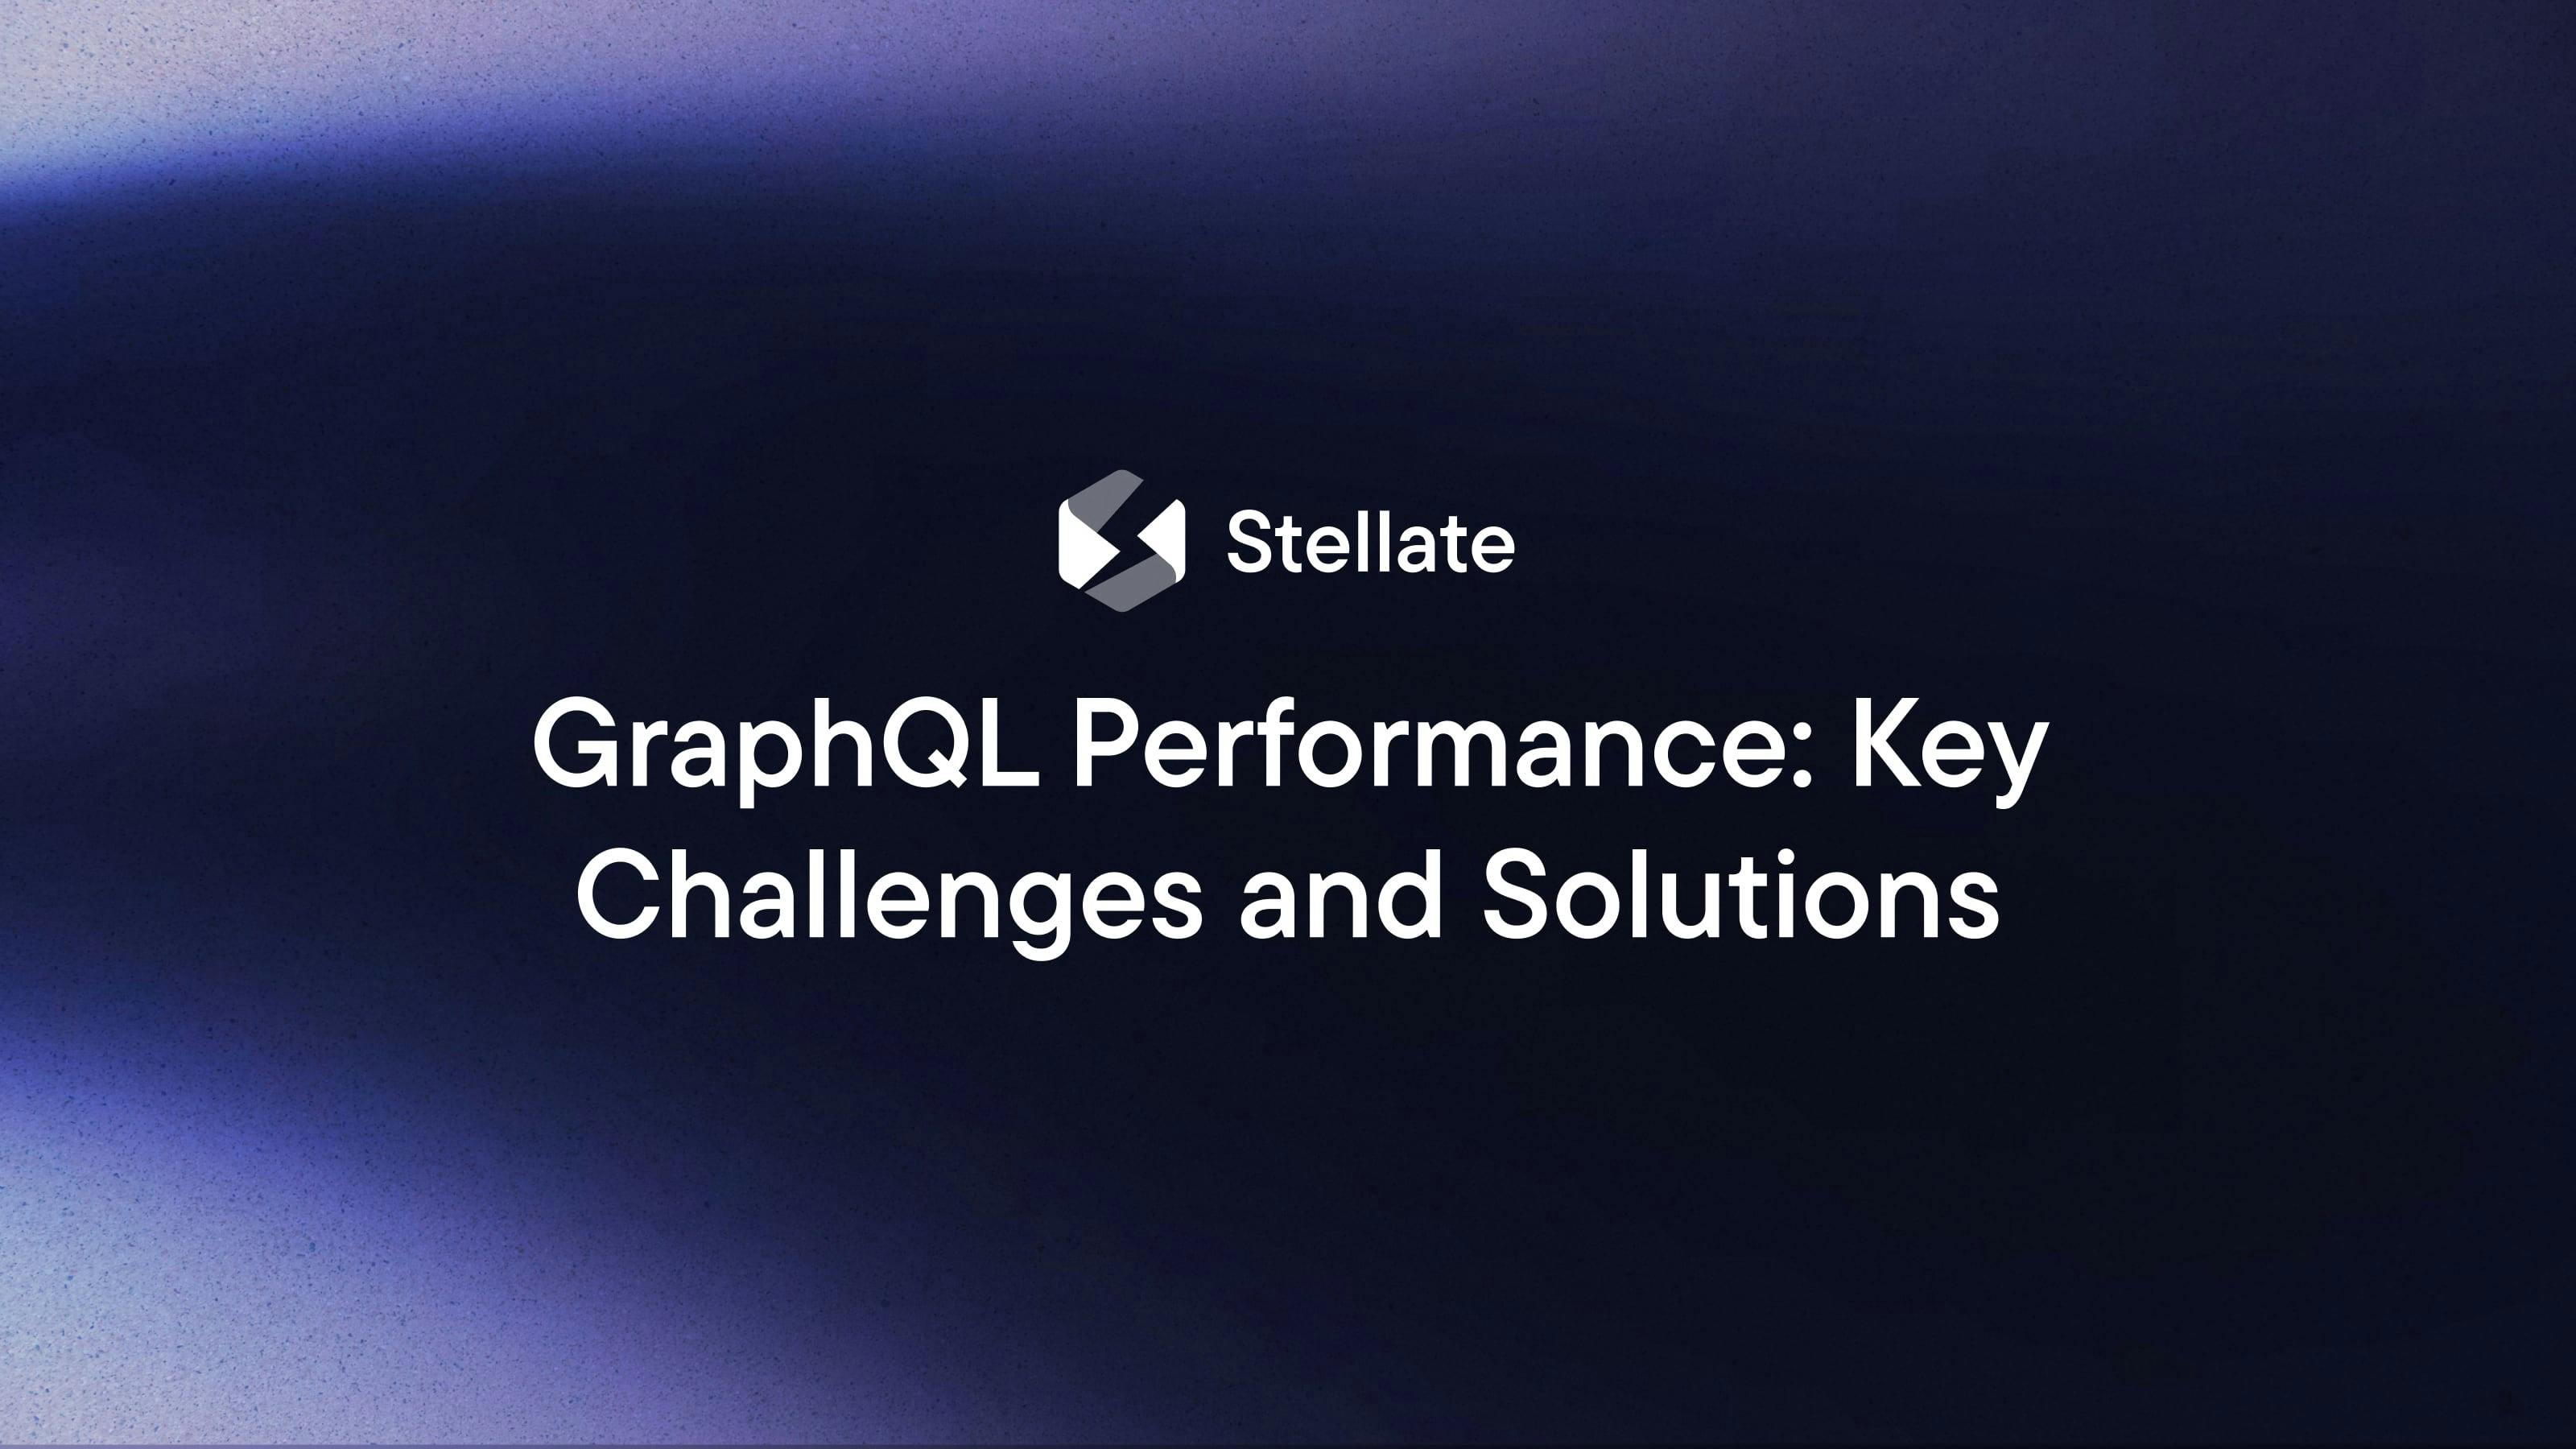 GraphQL Performance: Key Challenges and Solutions